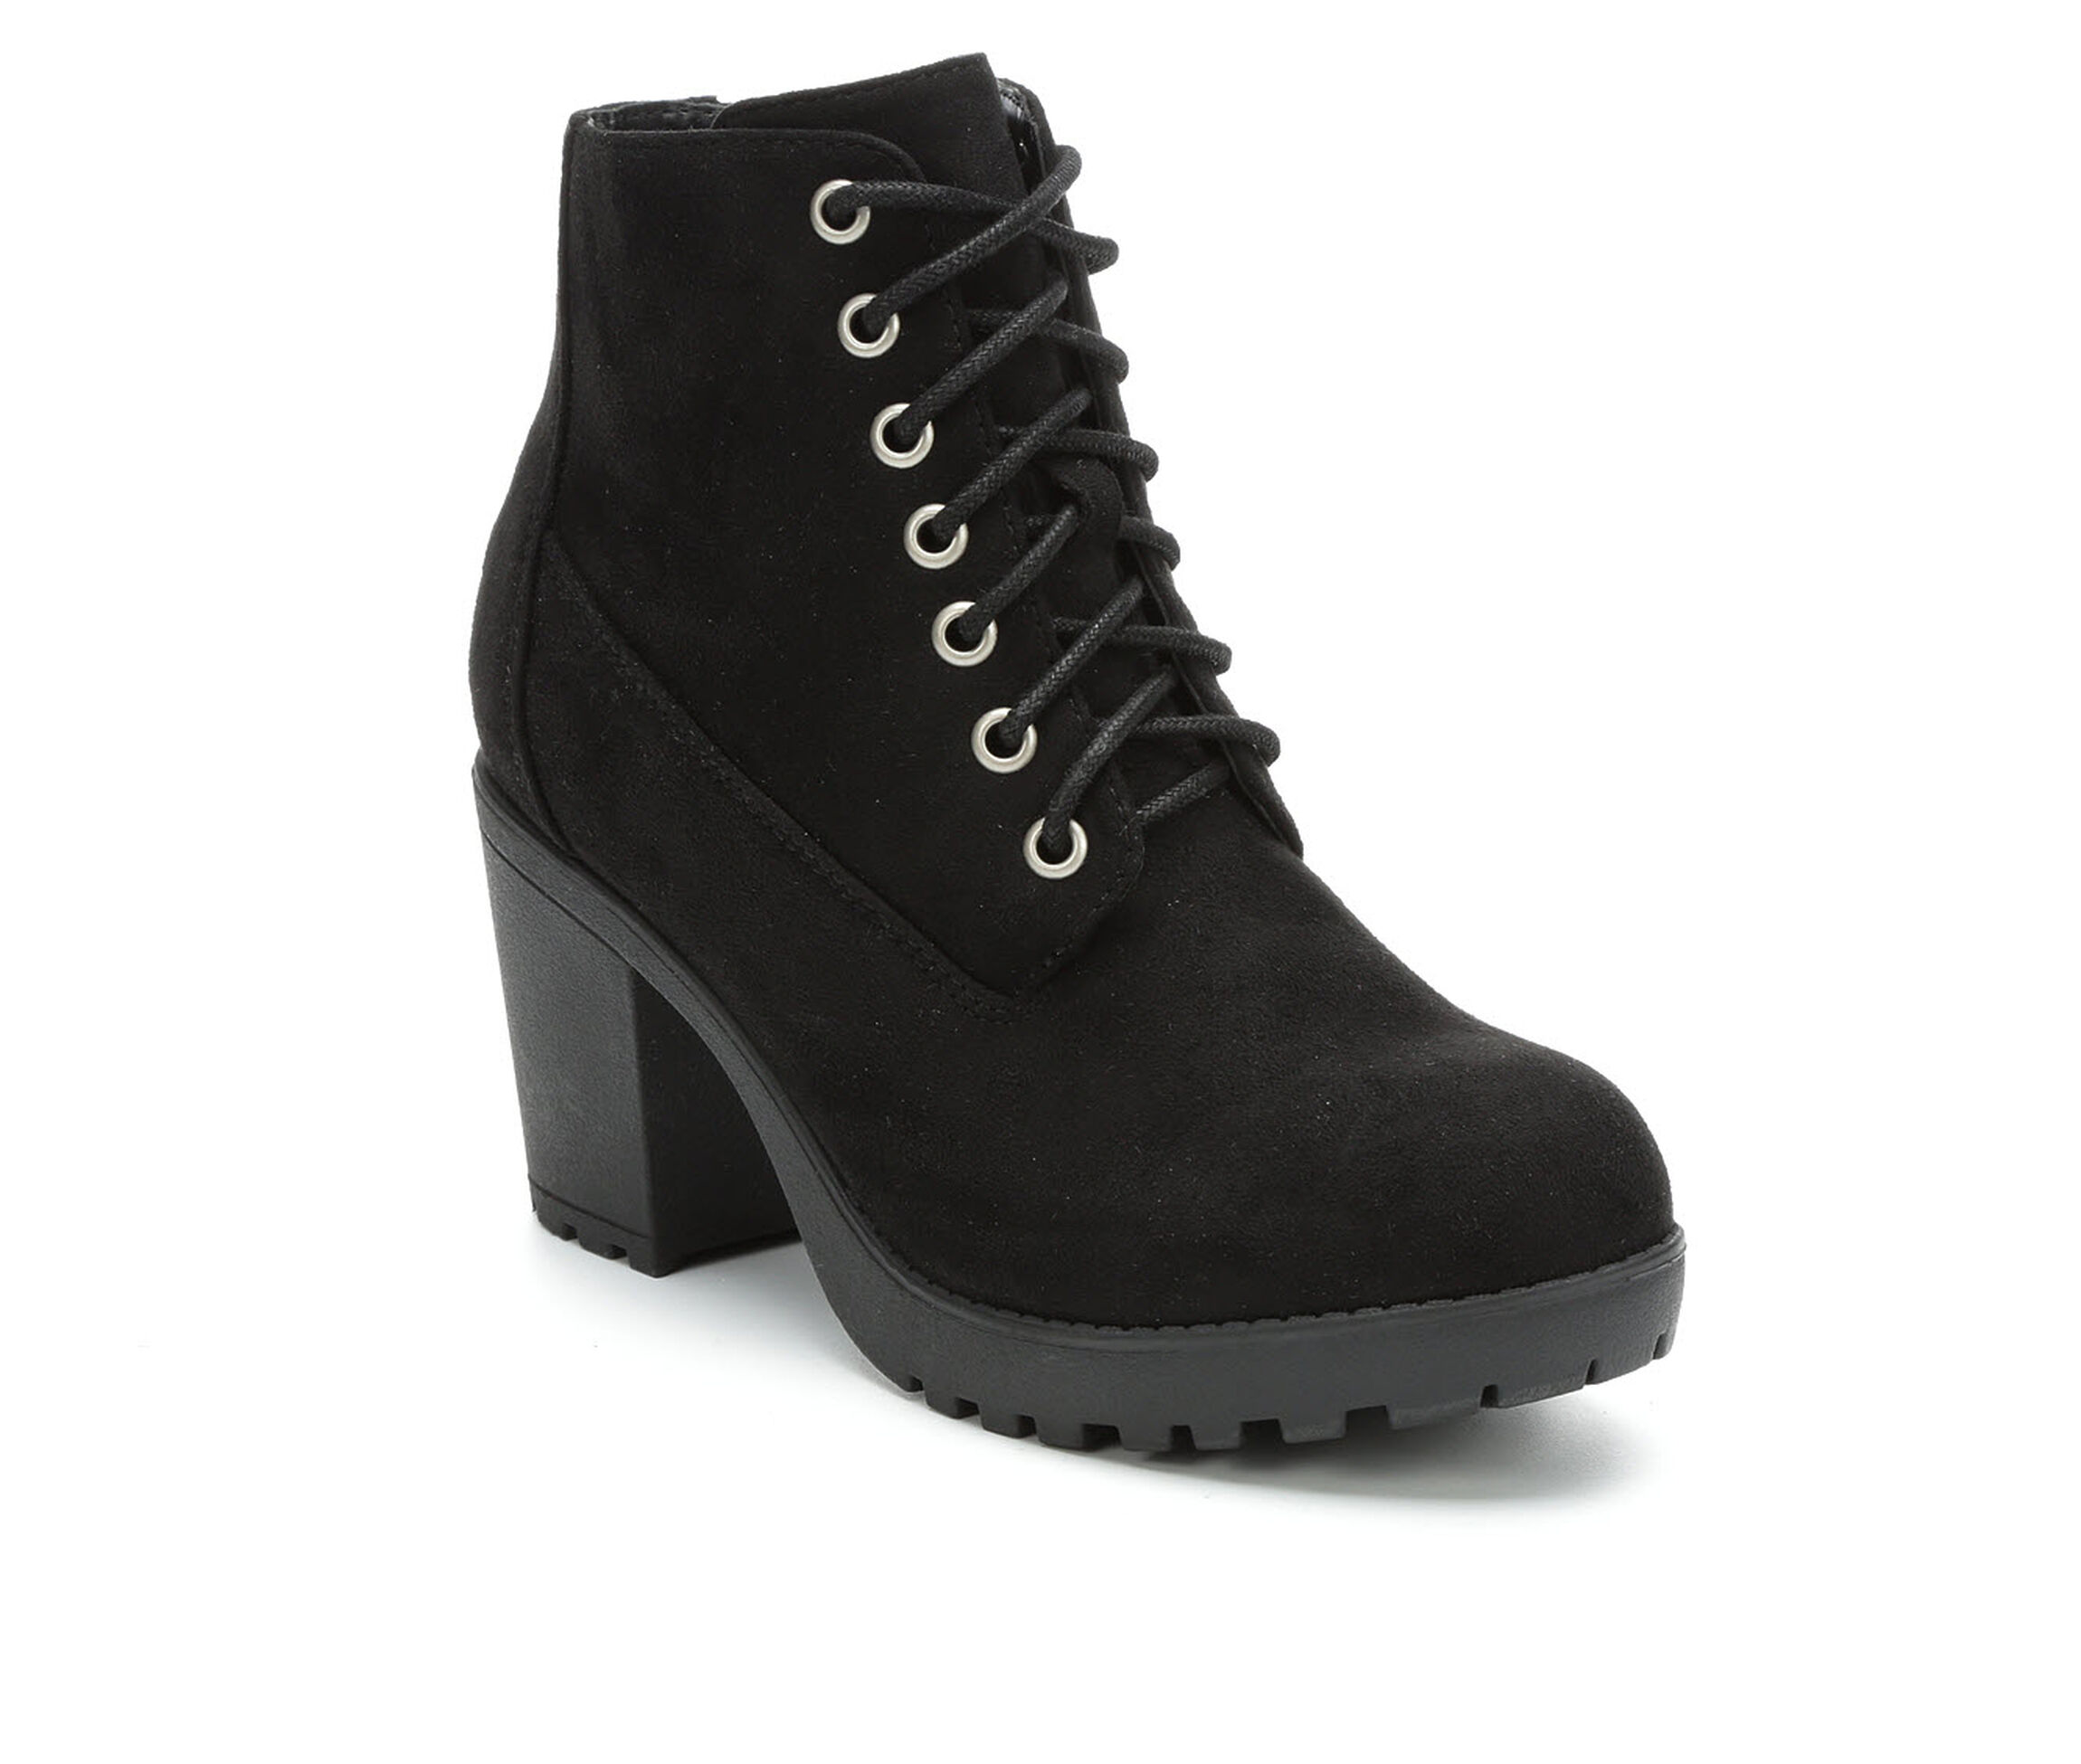 Black Heeled Boots Womens Outlet Here, Save 49% | jlcatj.gob.mx